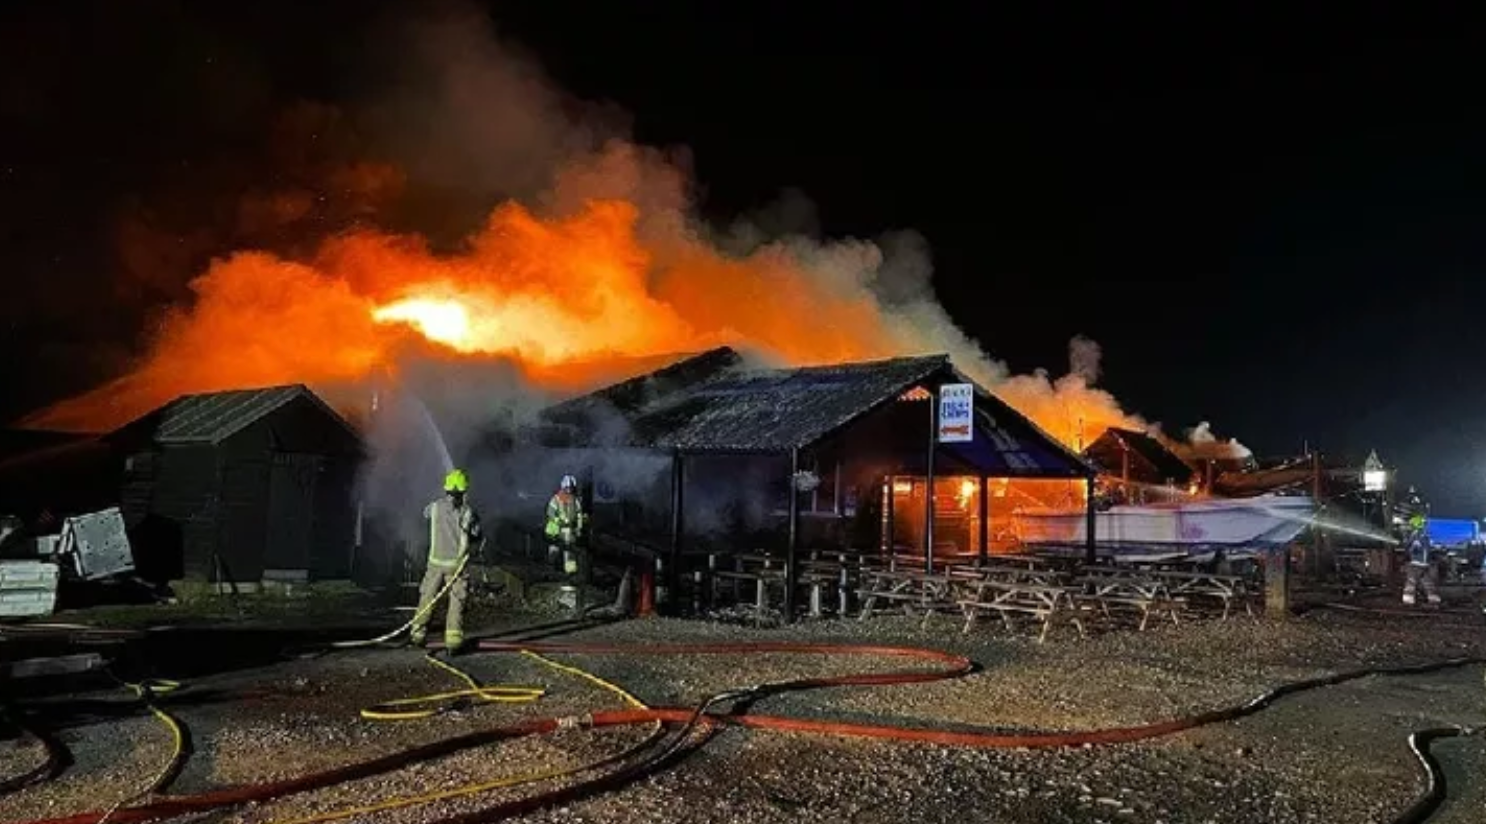 Around 50 firefighters tackled the huge fire